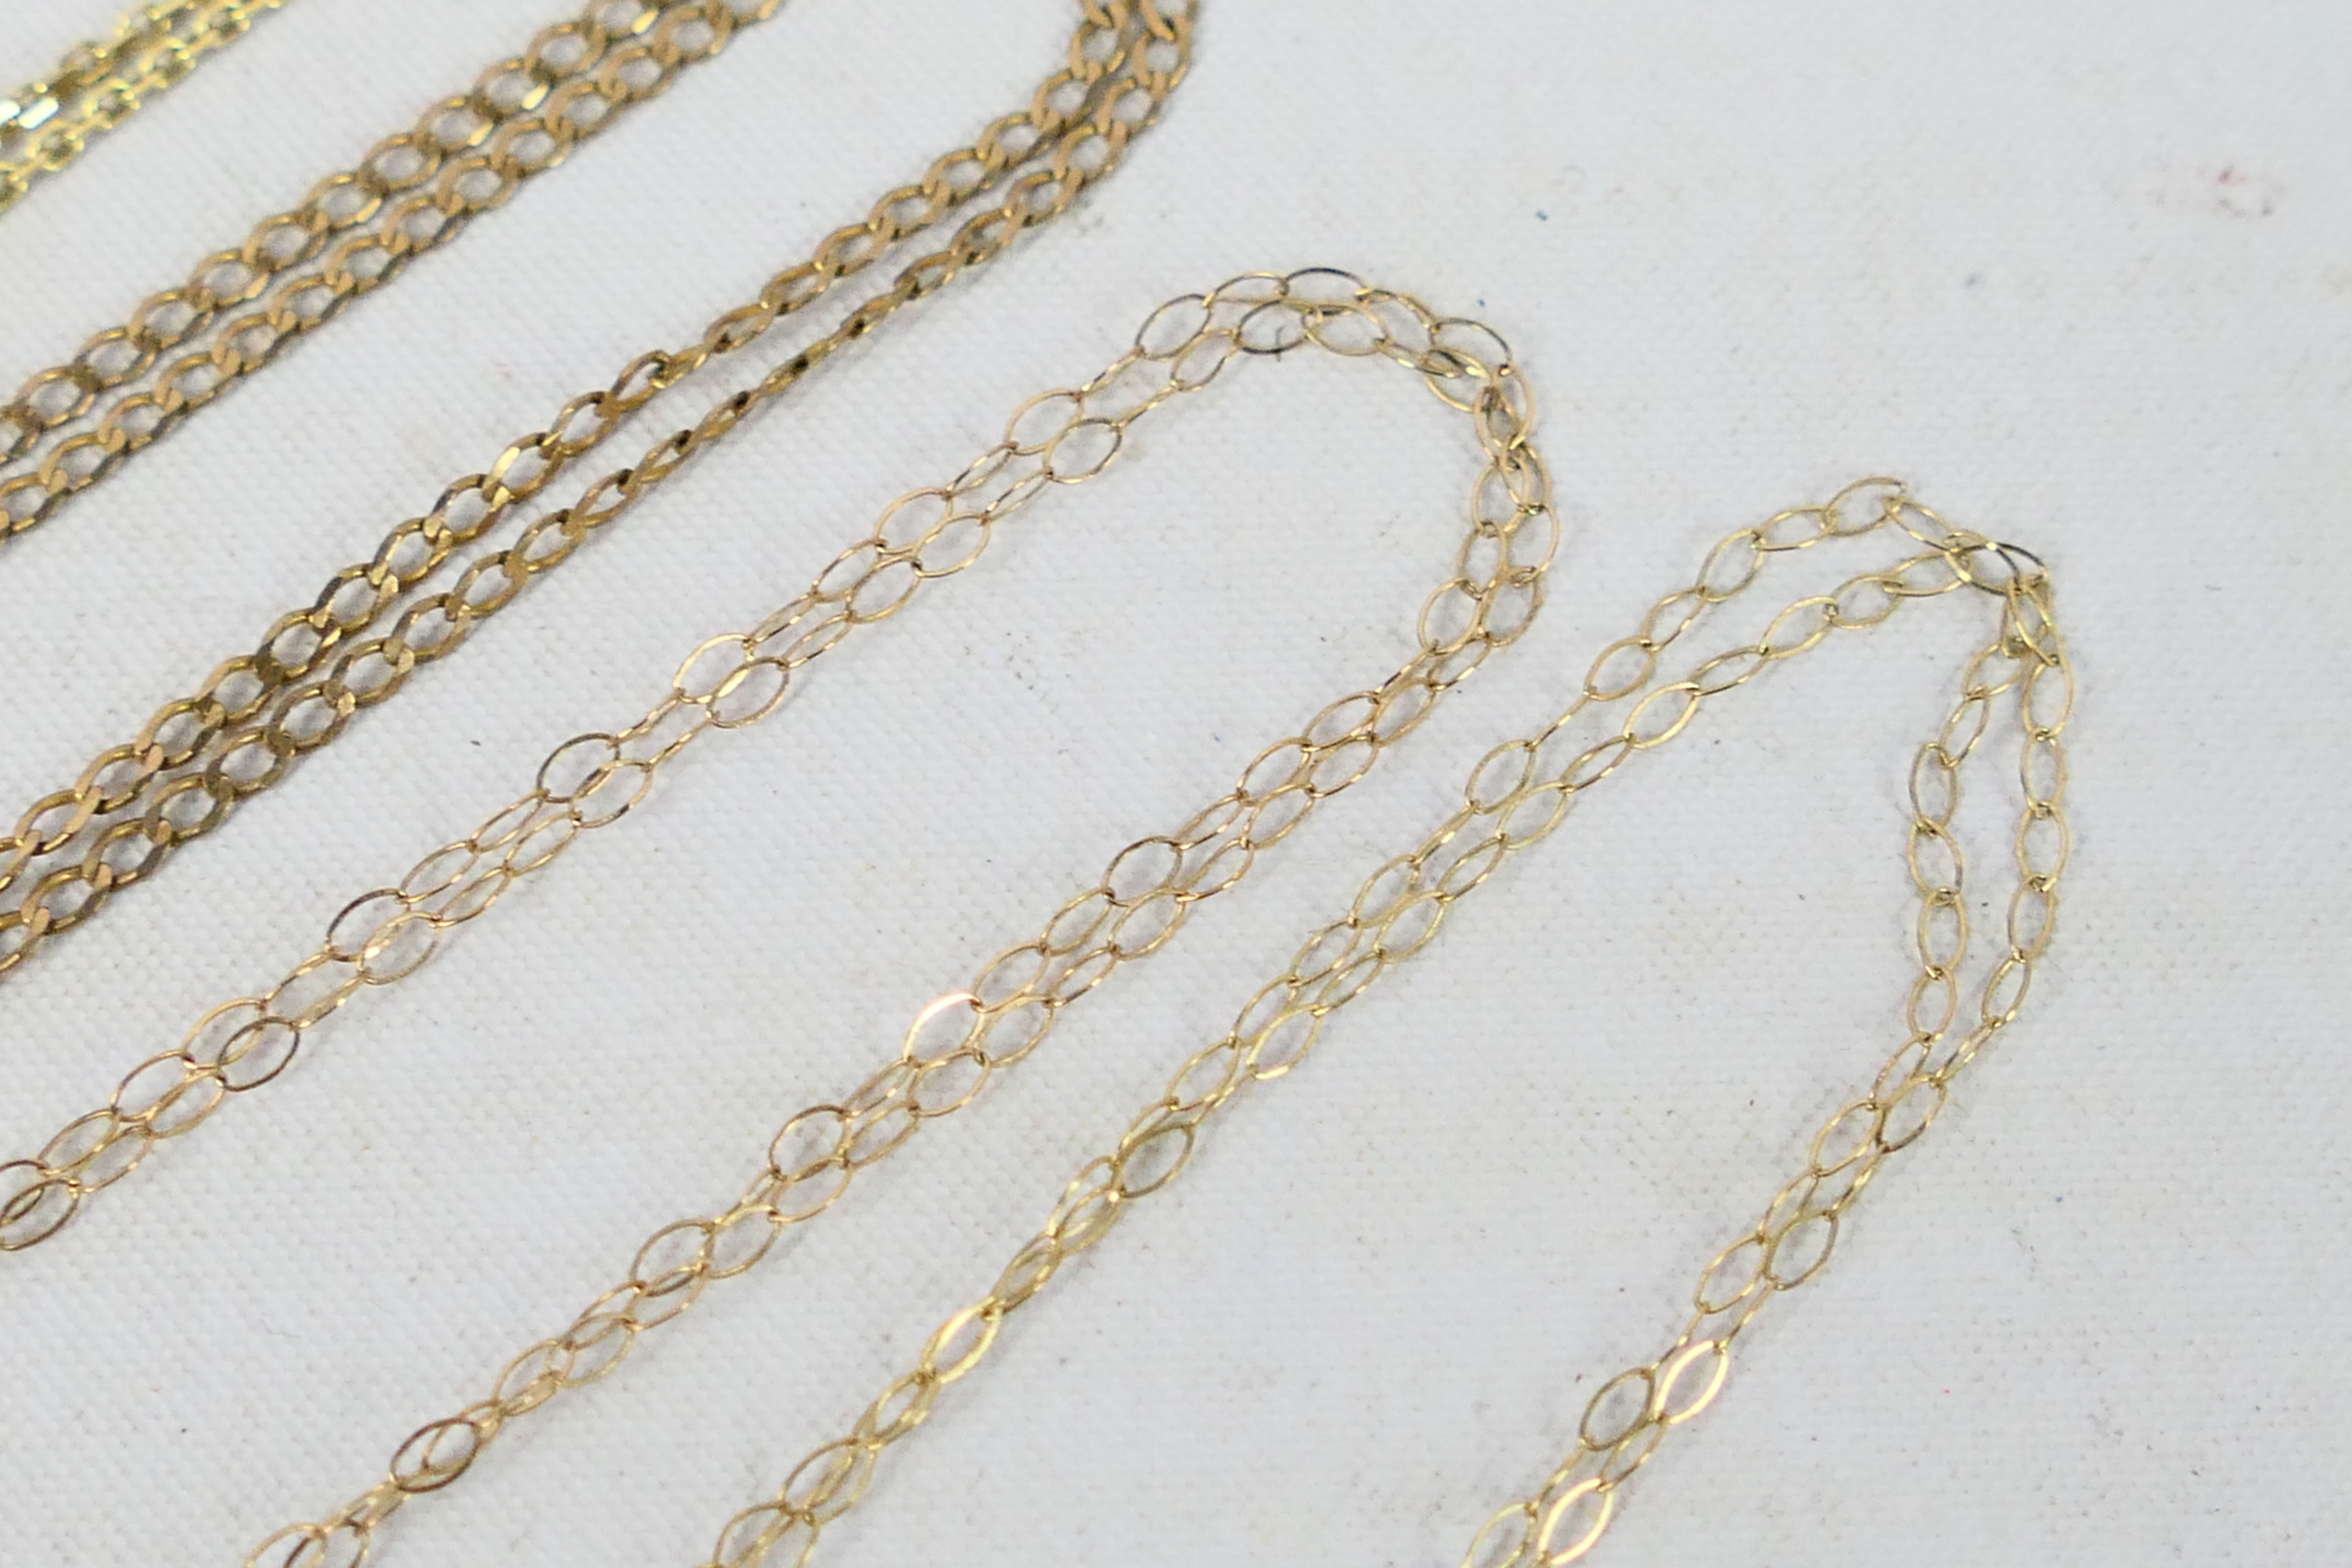 Four fine trace necklace chains one with Special Mum pendant, - Image 3 of 5